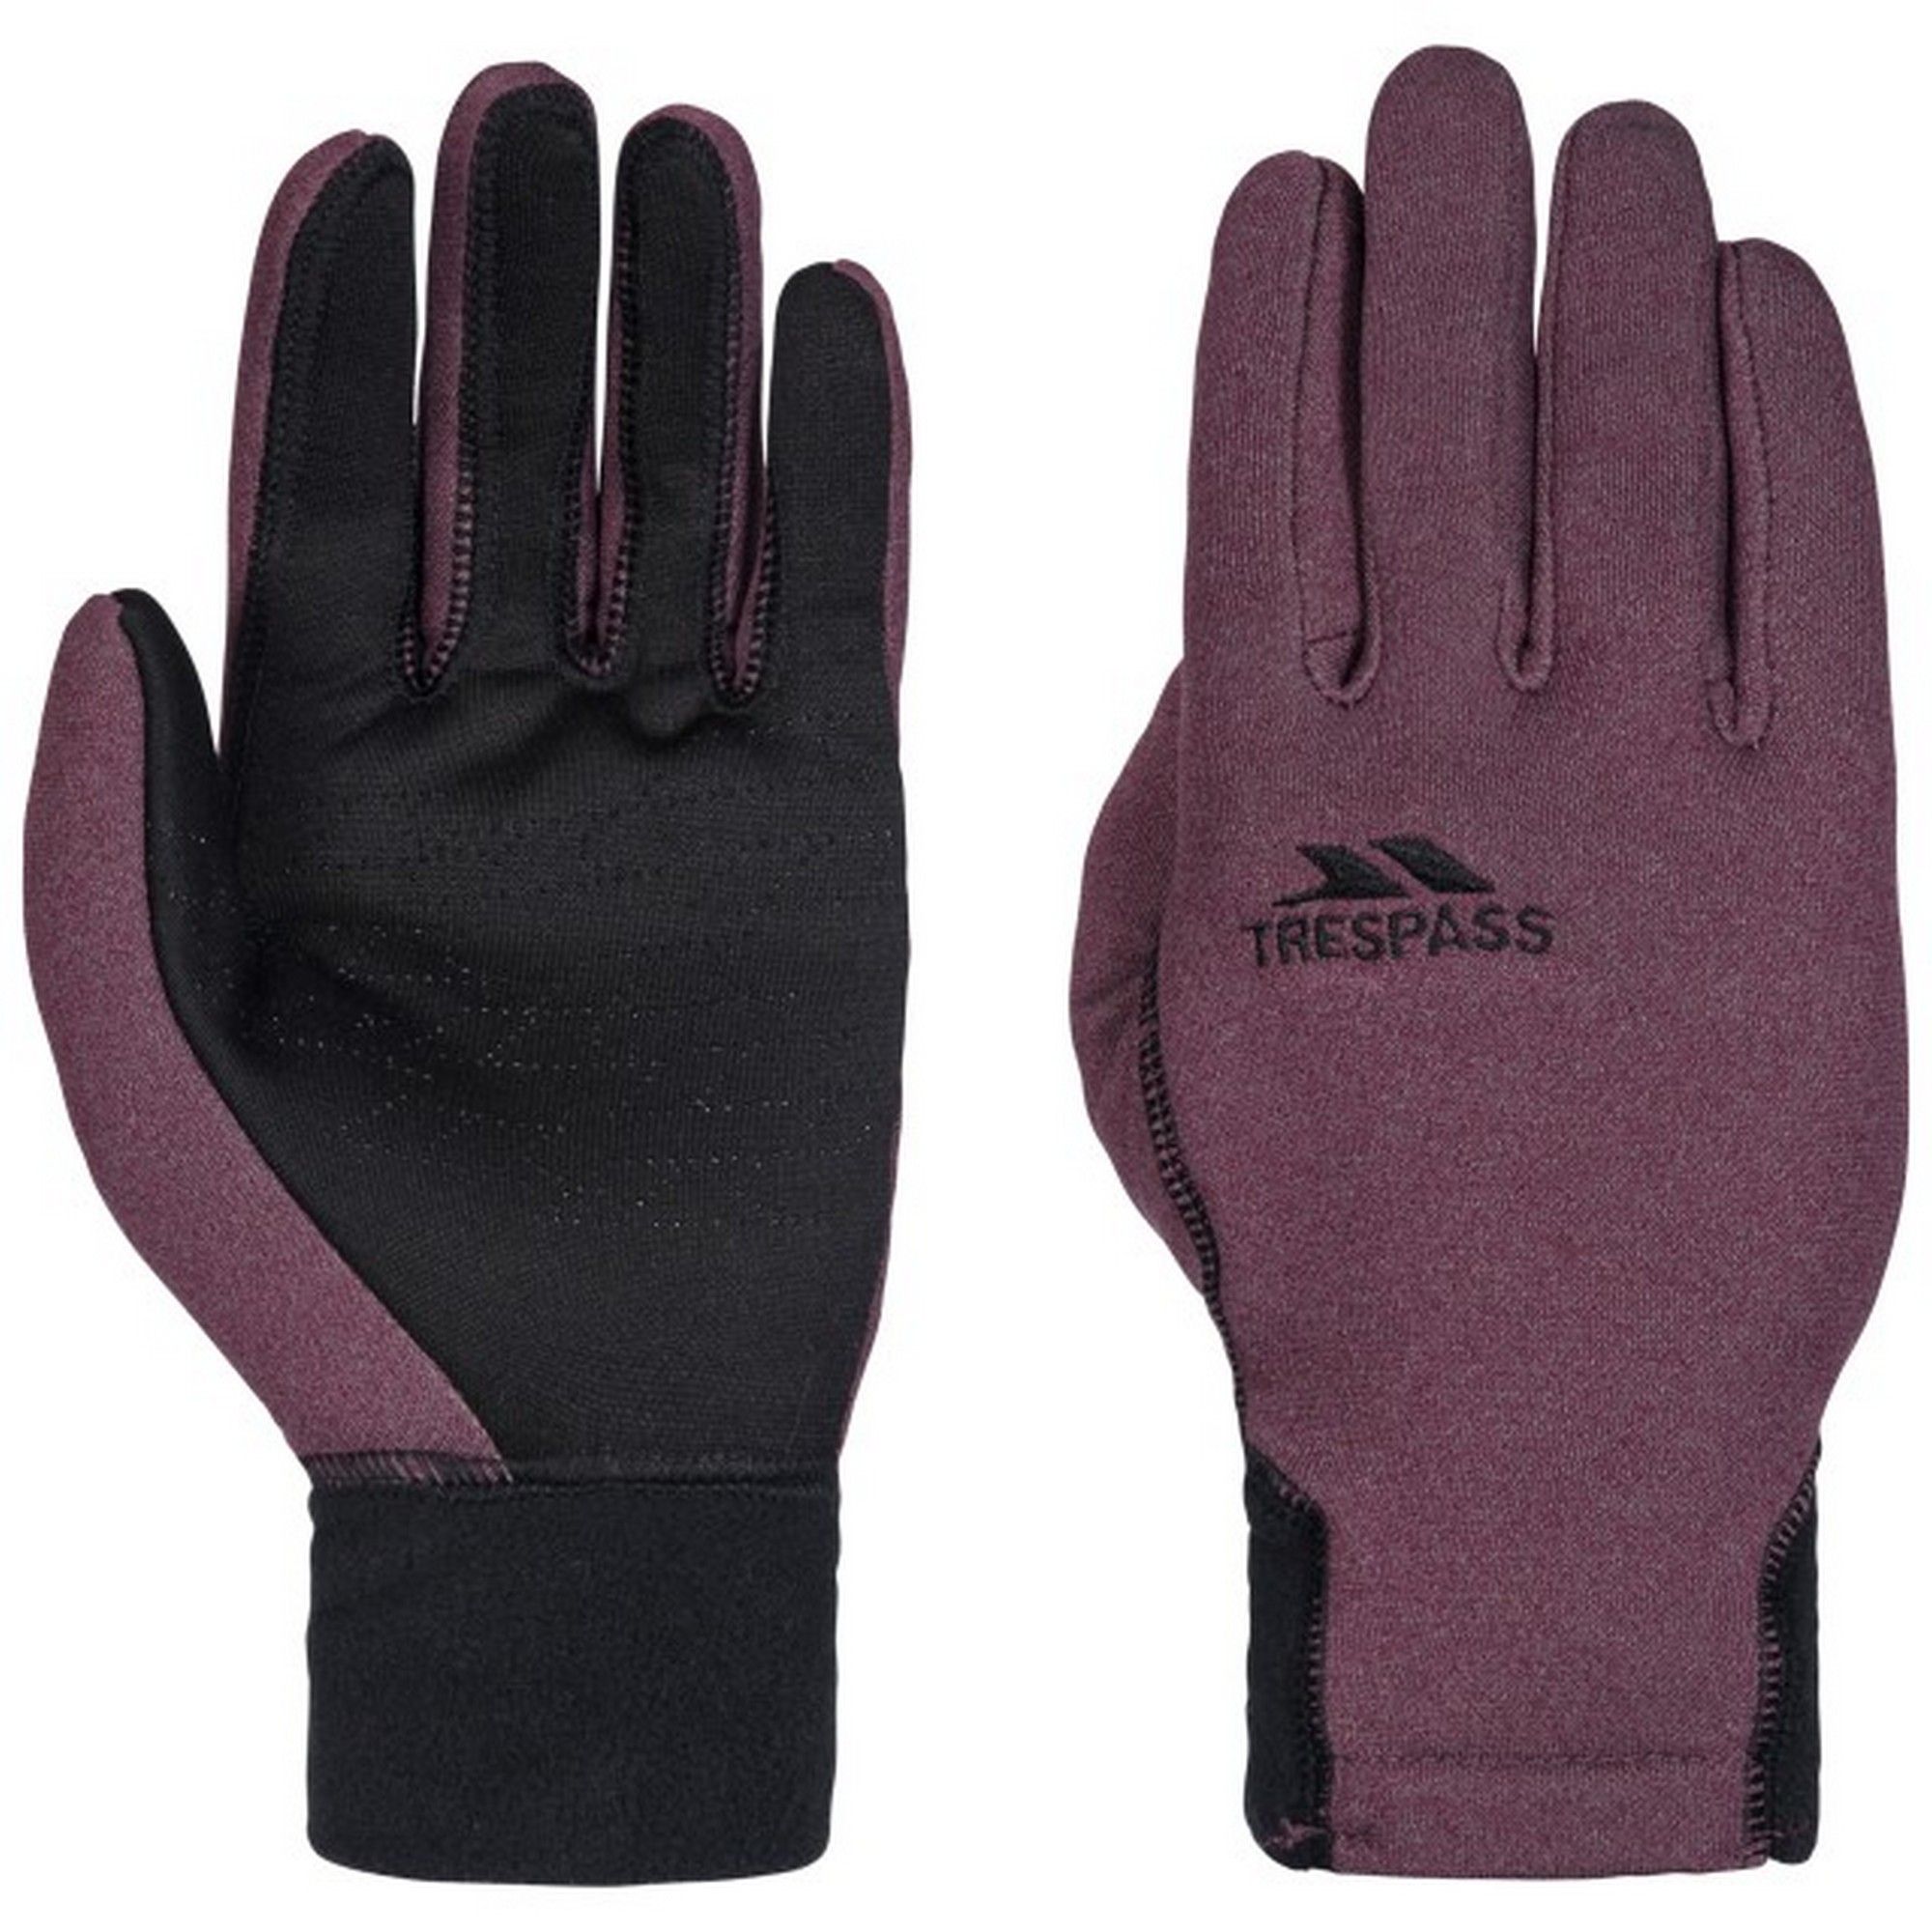 Gloves made from soft, stretch knitted fabric. Fleece cuff. Touch screen compatible. Ideal for wearing outdoors on a cold day. 95% Polyester. 5% Elastane.